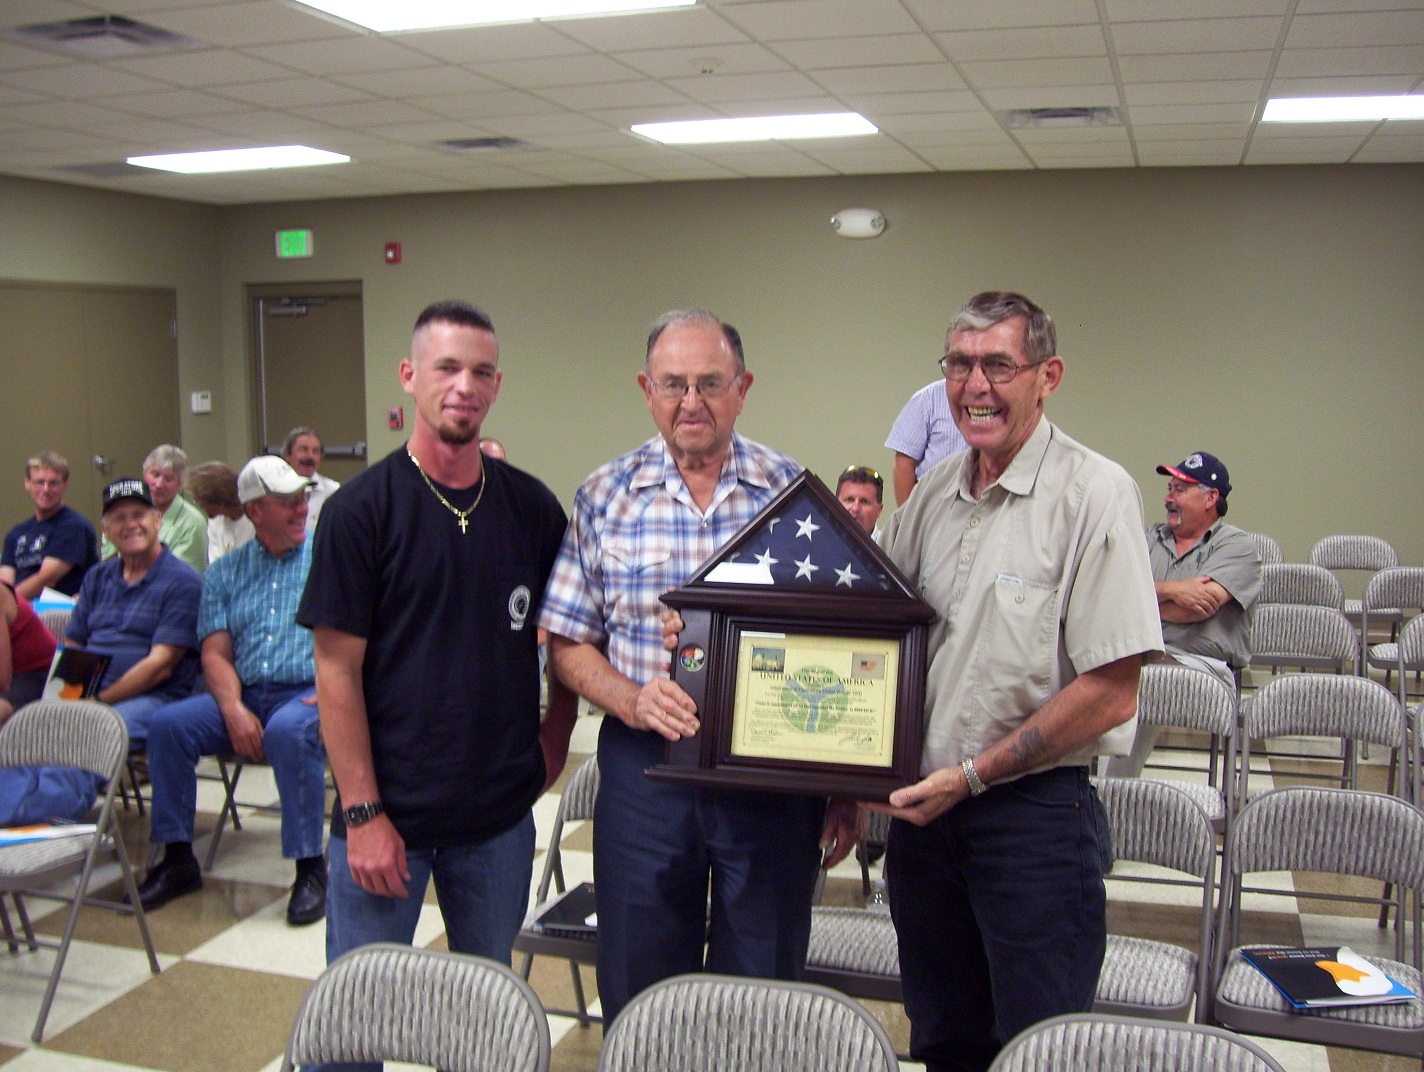 Member, Sgt. James Knight presenting retirees Ray Boggs and Les Berry with American Flag and certificate from Iraq